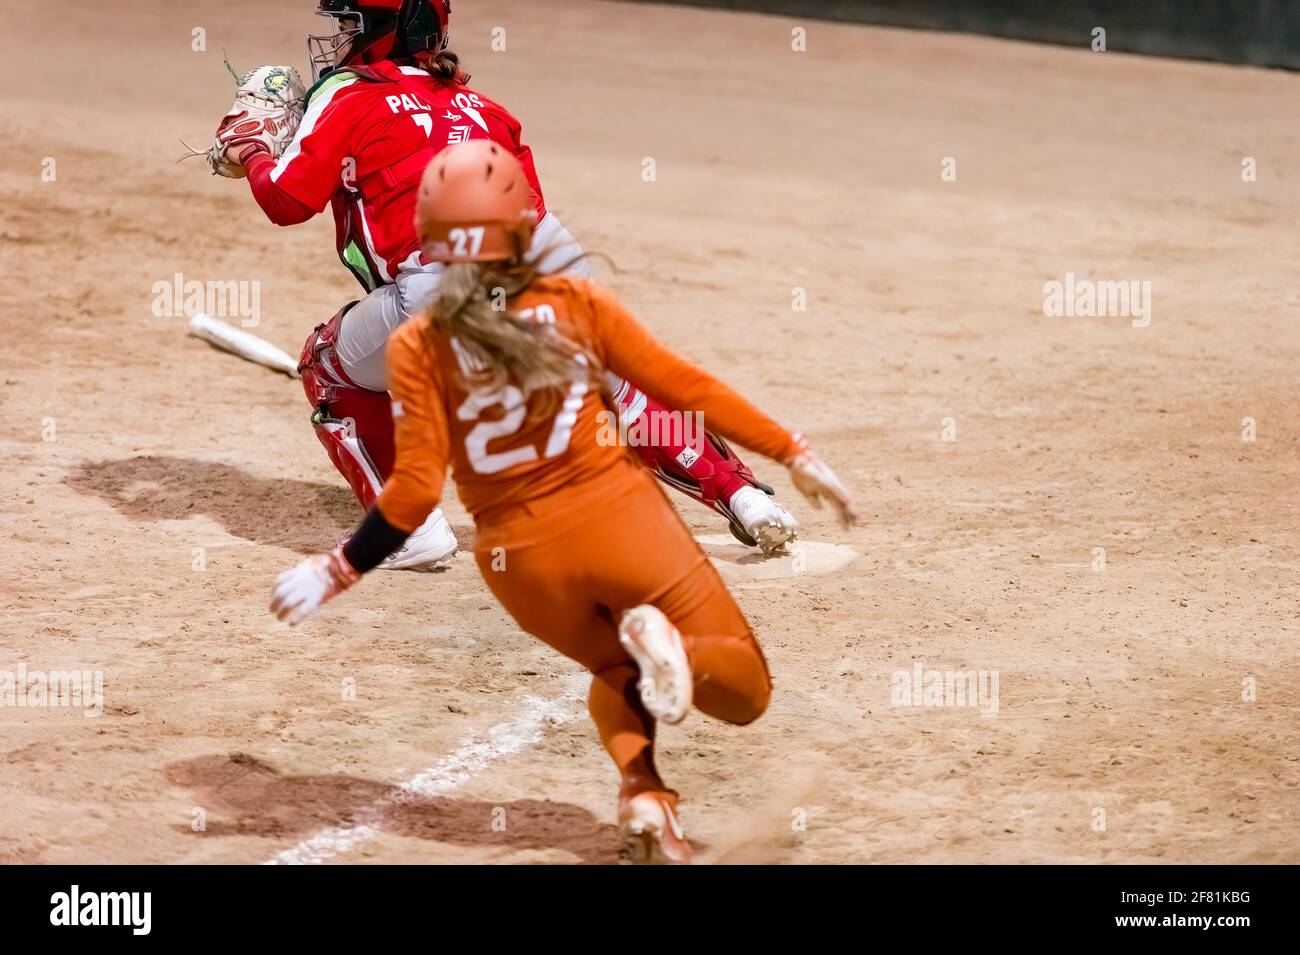 A Texas Longhorn Player is Sliding Into Home Plate Scoring A Run Stock Photo